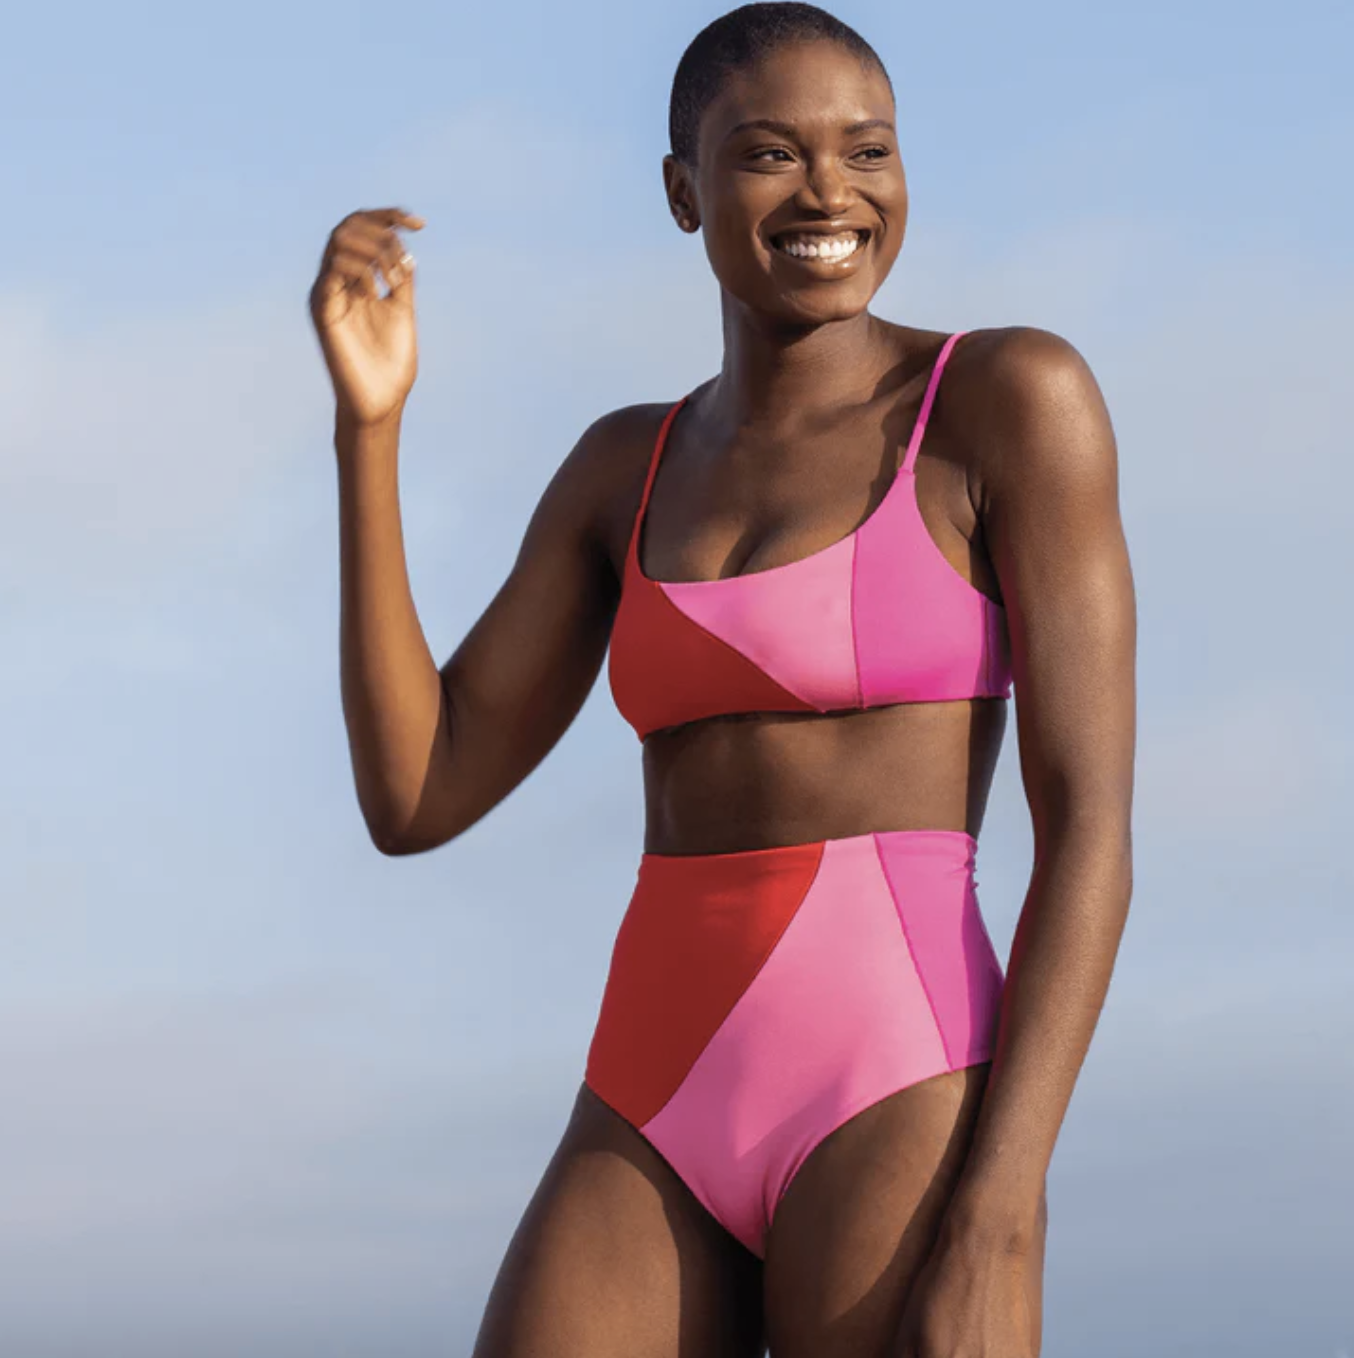 model wearing the suit with high waisted bottom and spaghetti strap top with colorblocks of pink and red